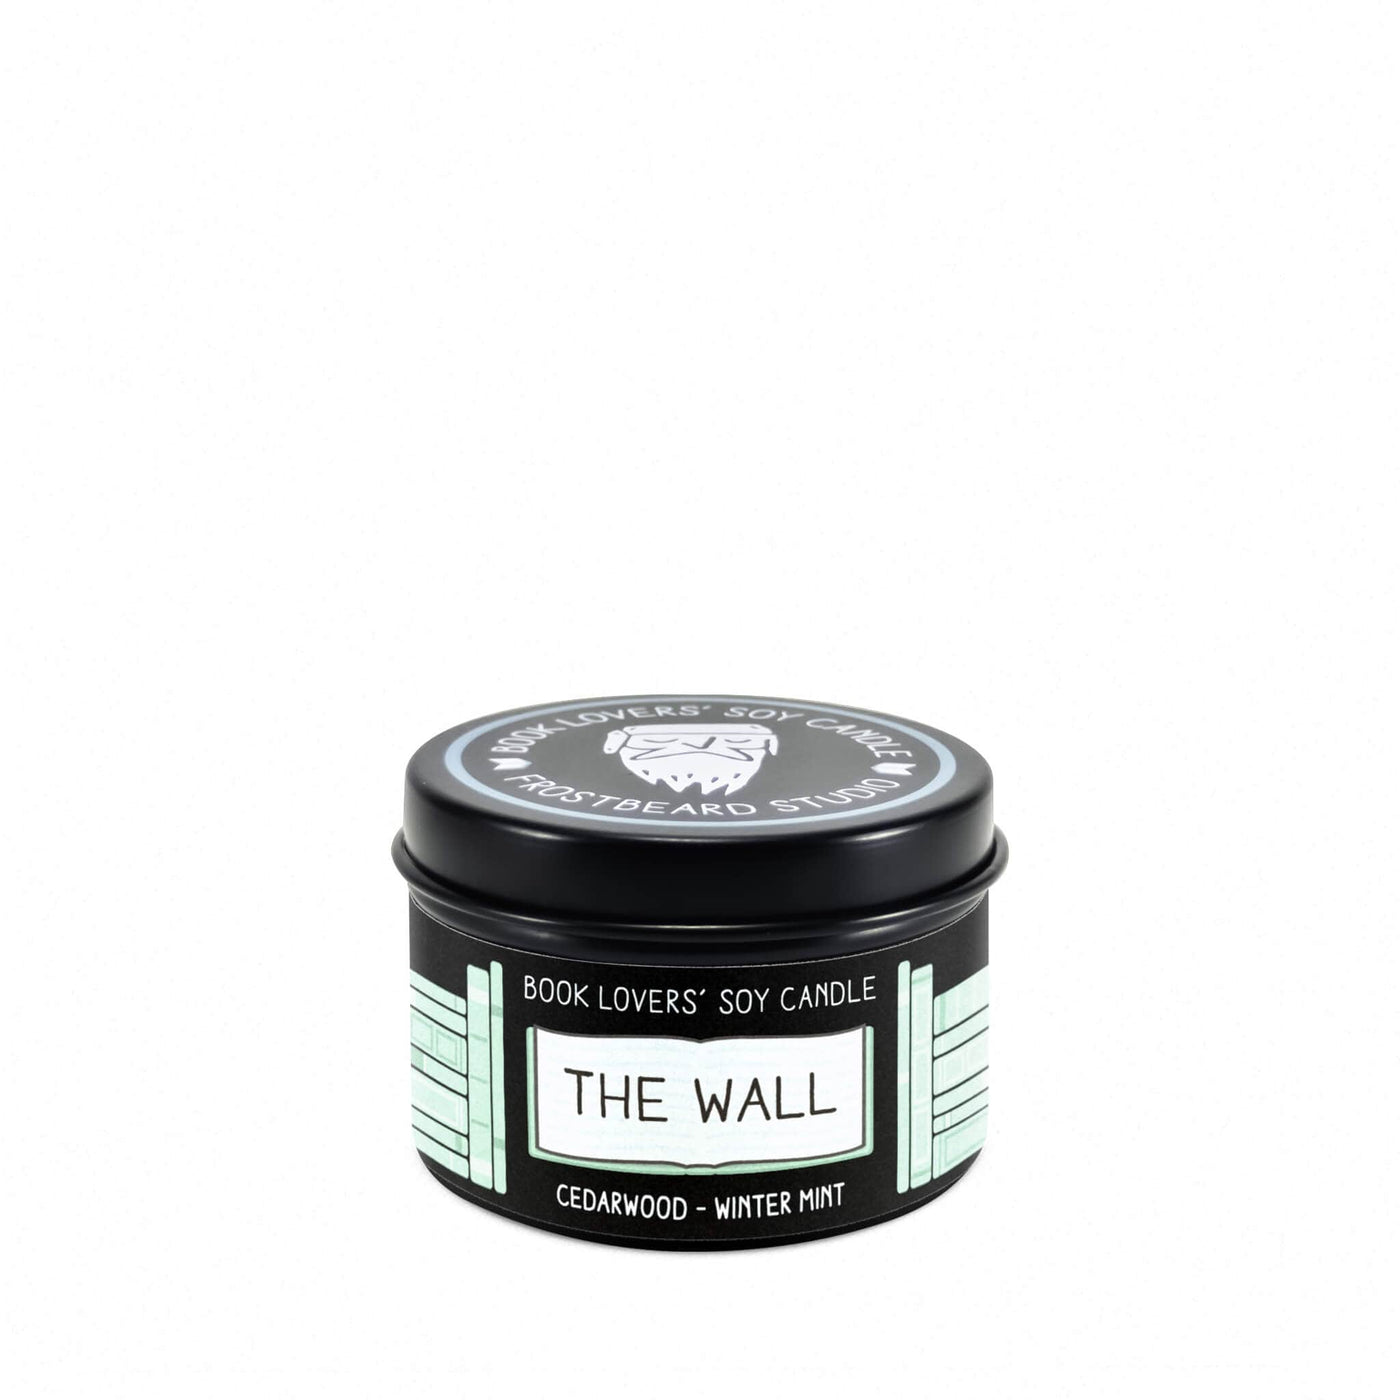 The Wall  -  2 oz Tin  -  Book Lovers' Soy Candle  -  Frostbeard Studio